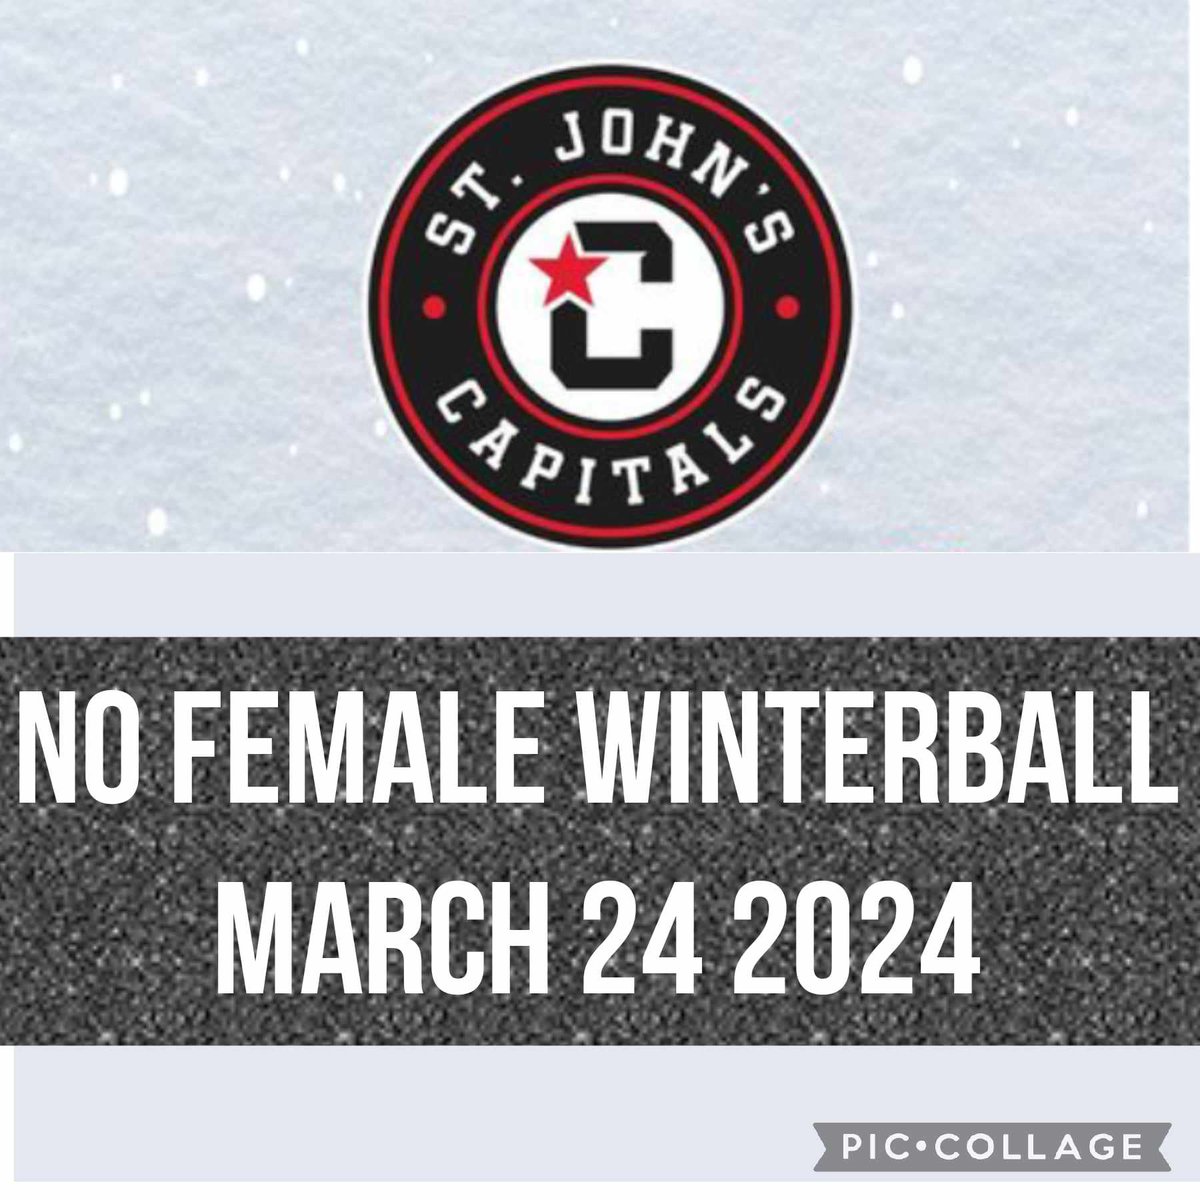 Reminder NO Female winterball sessions tonight Sunday March 24, 2024.